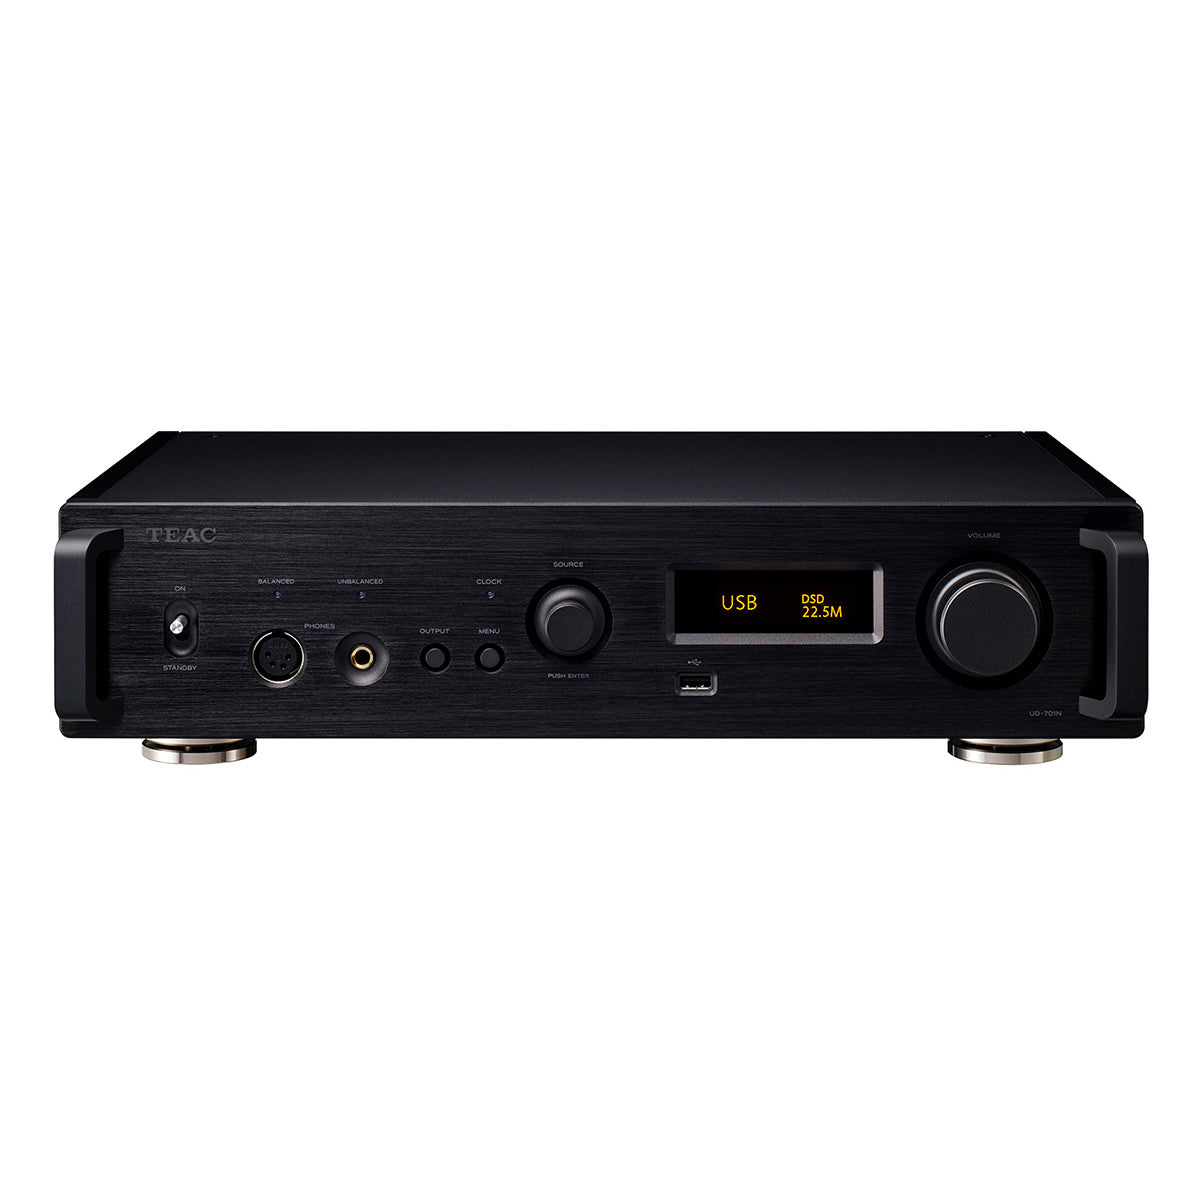 TEAC UD-701N Dual-Mono Fully-Balanced Network Player with Built-In Preamplifier and USB DAC